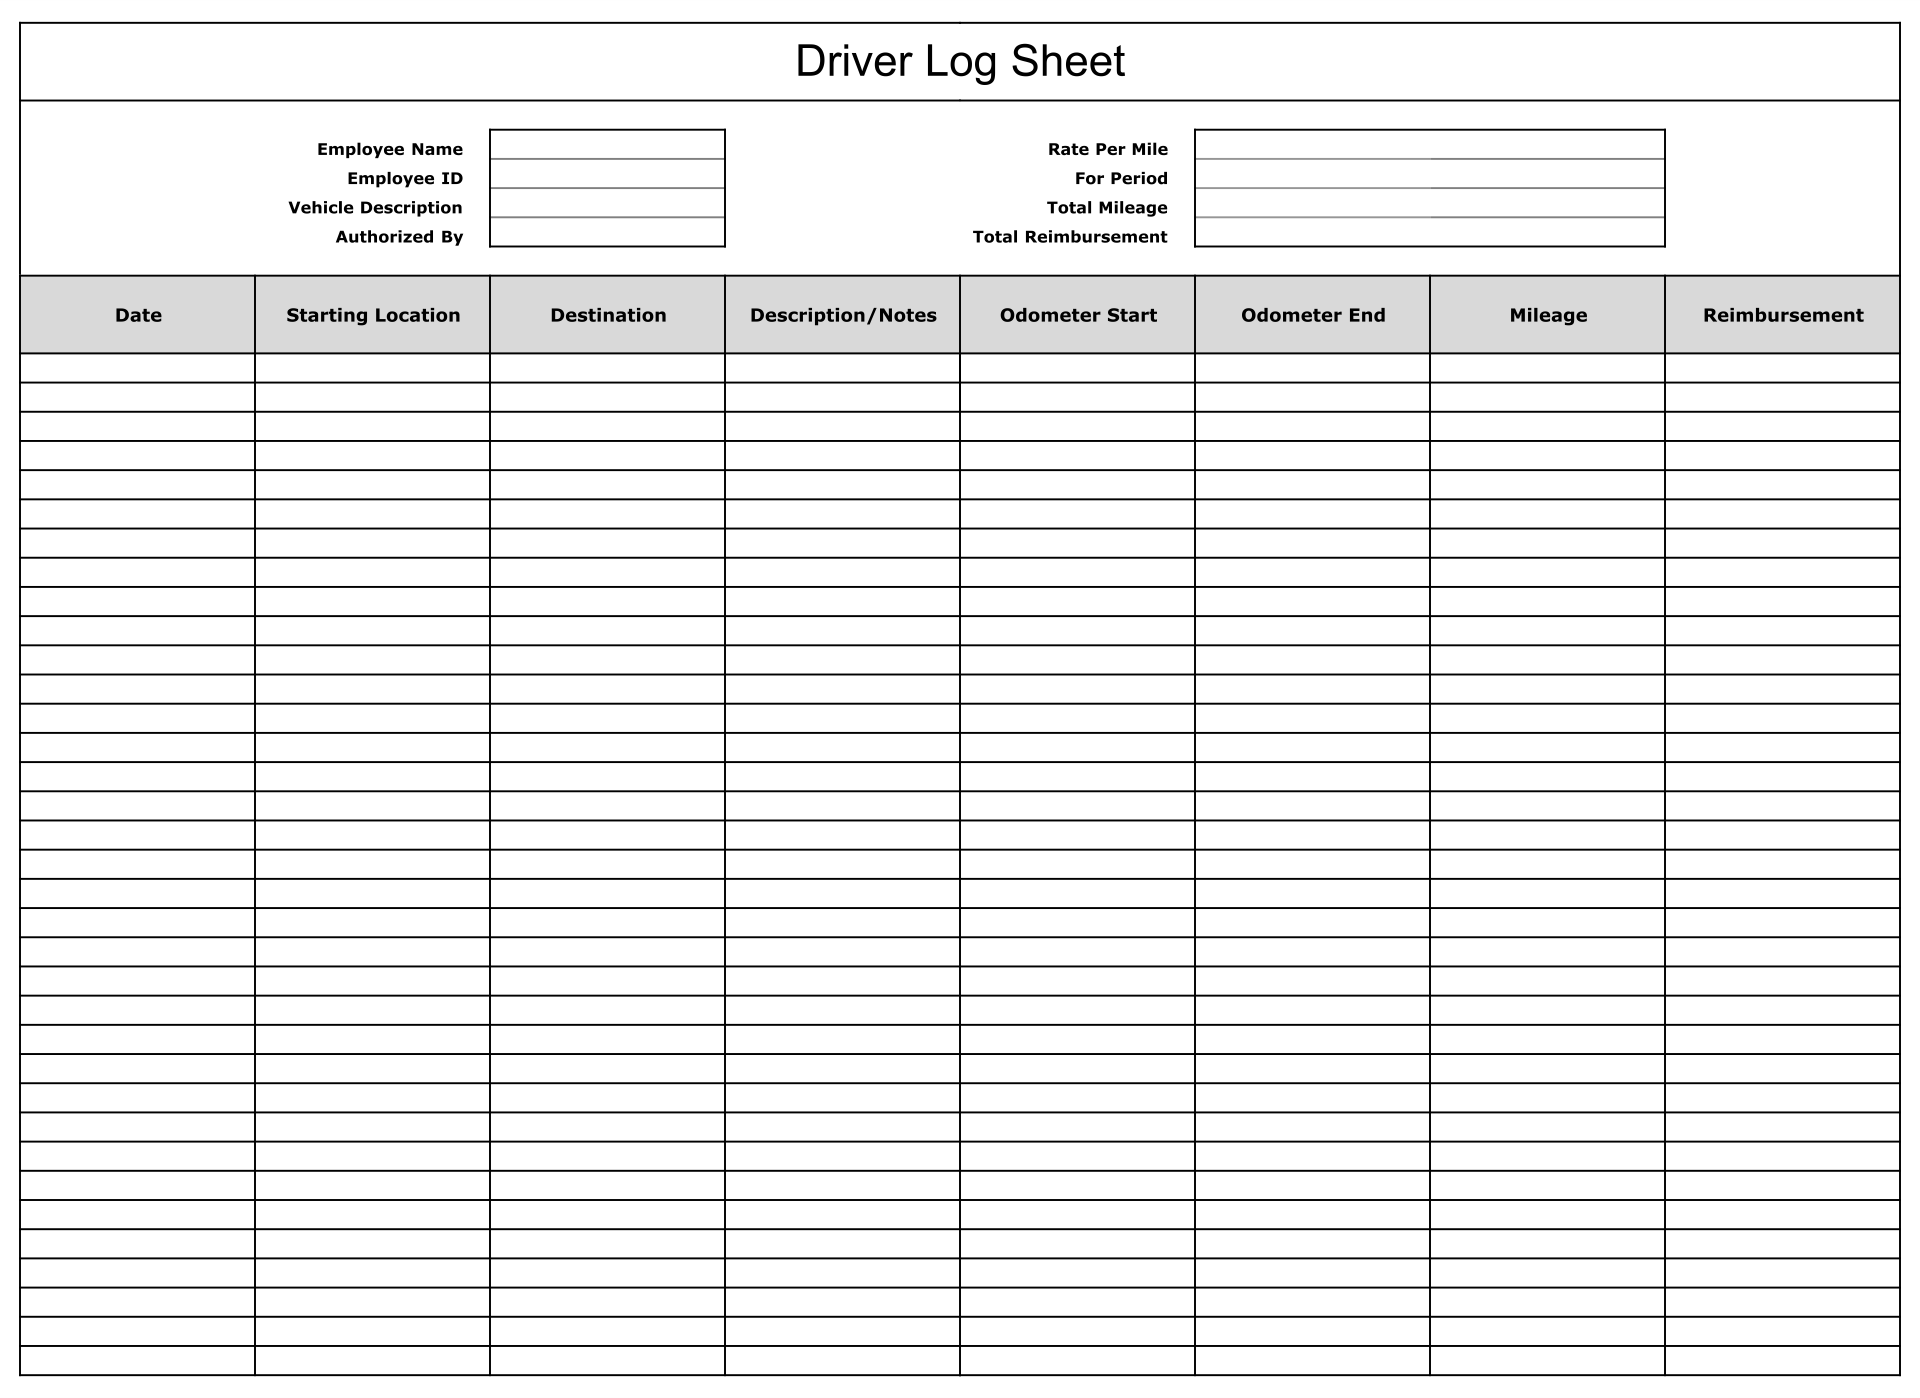 7-best-images-of-free-printable-trip-sheets-driver-trip-log-sheet